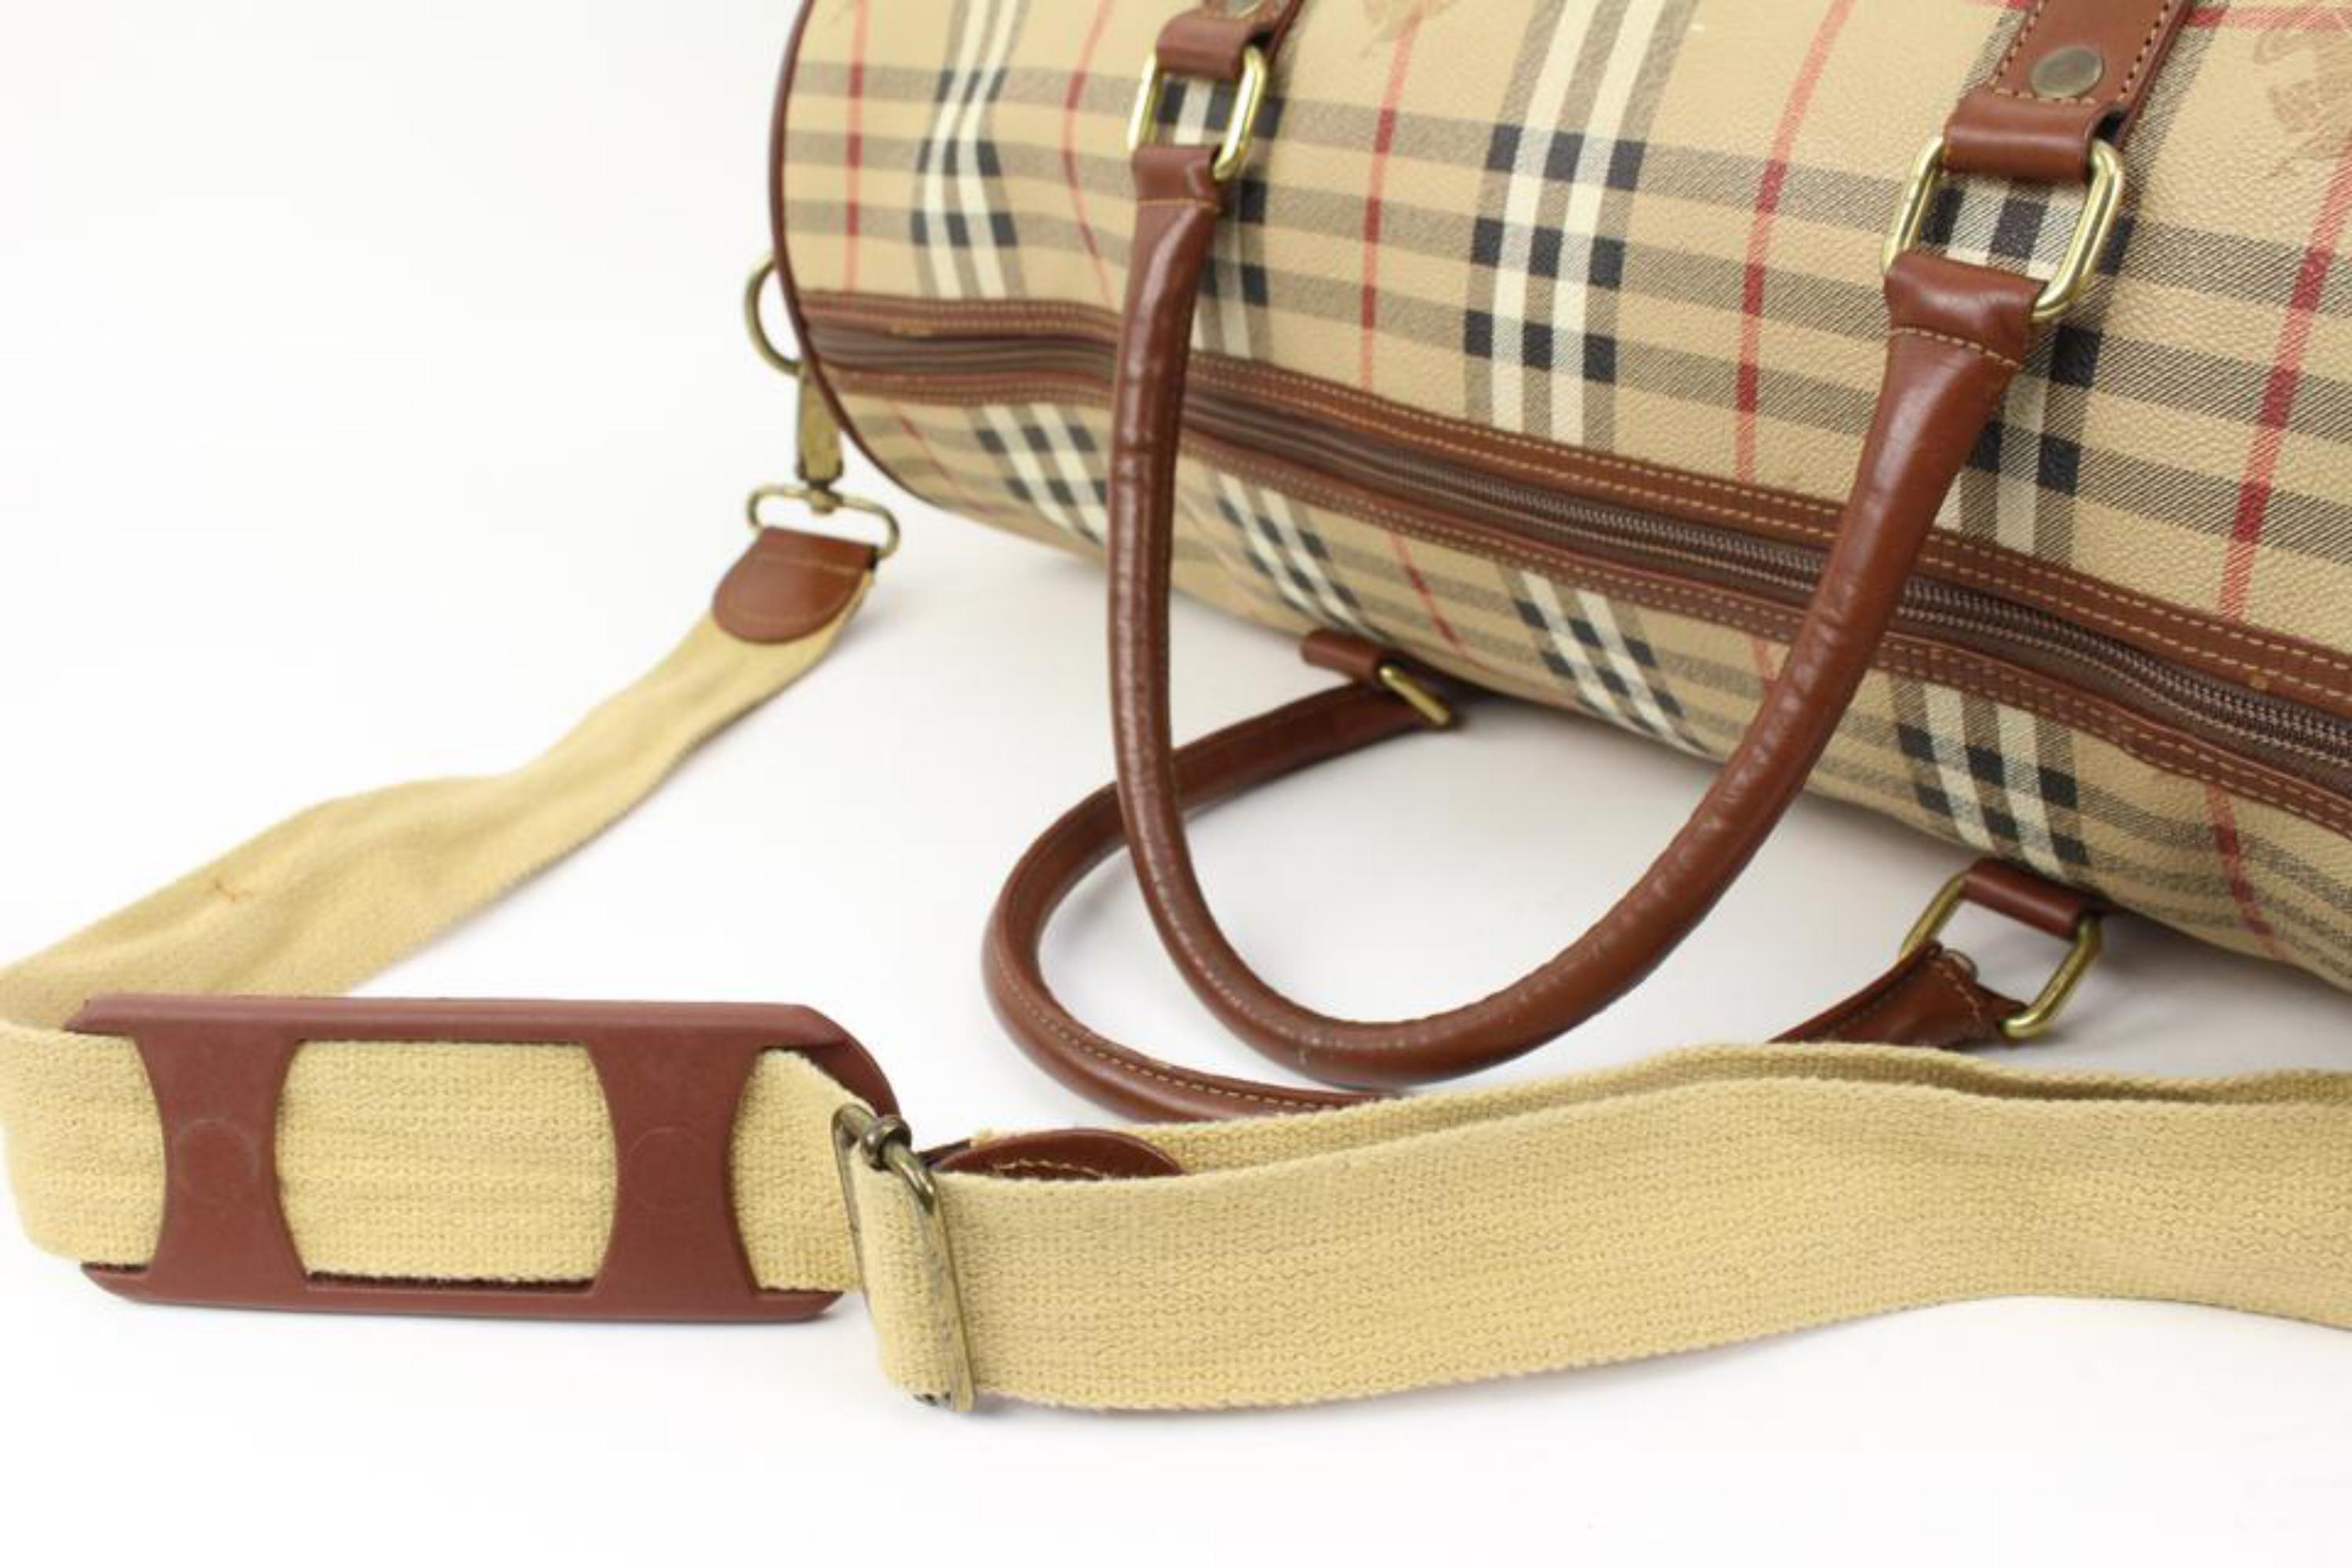 Burberry Beige Nova Check Boston Duffle Bag with Strap 42b324s In Good Condition For Sale In Dix hills, NY